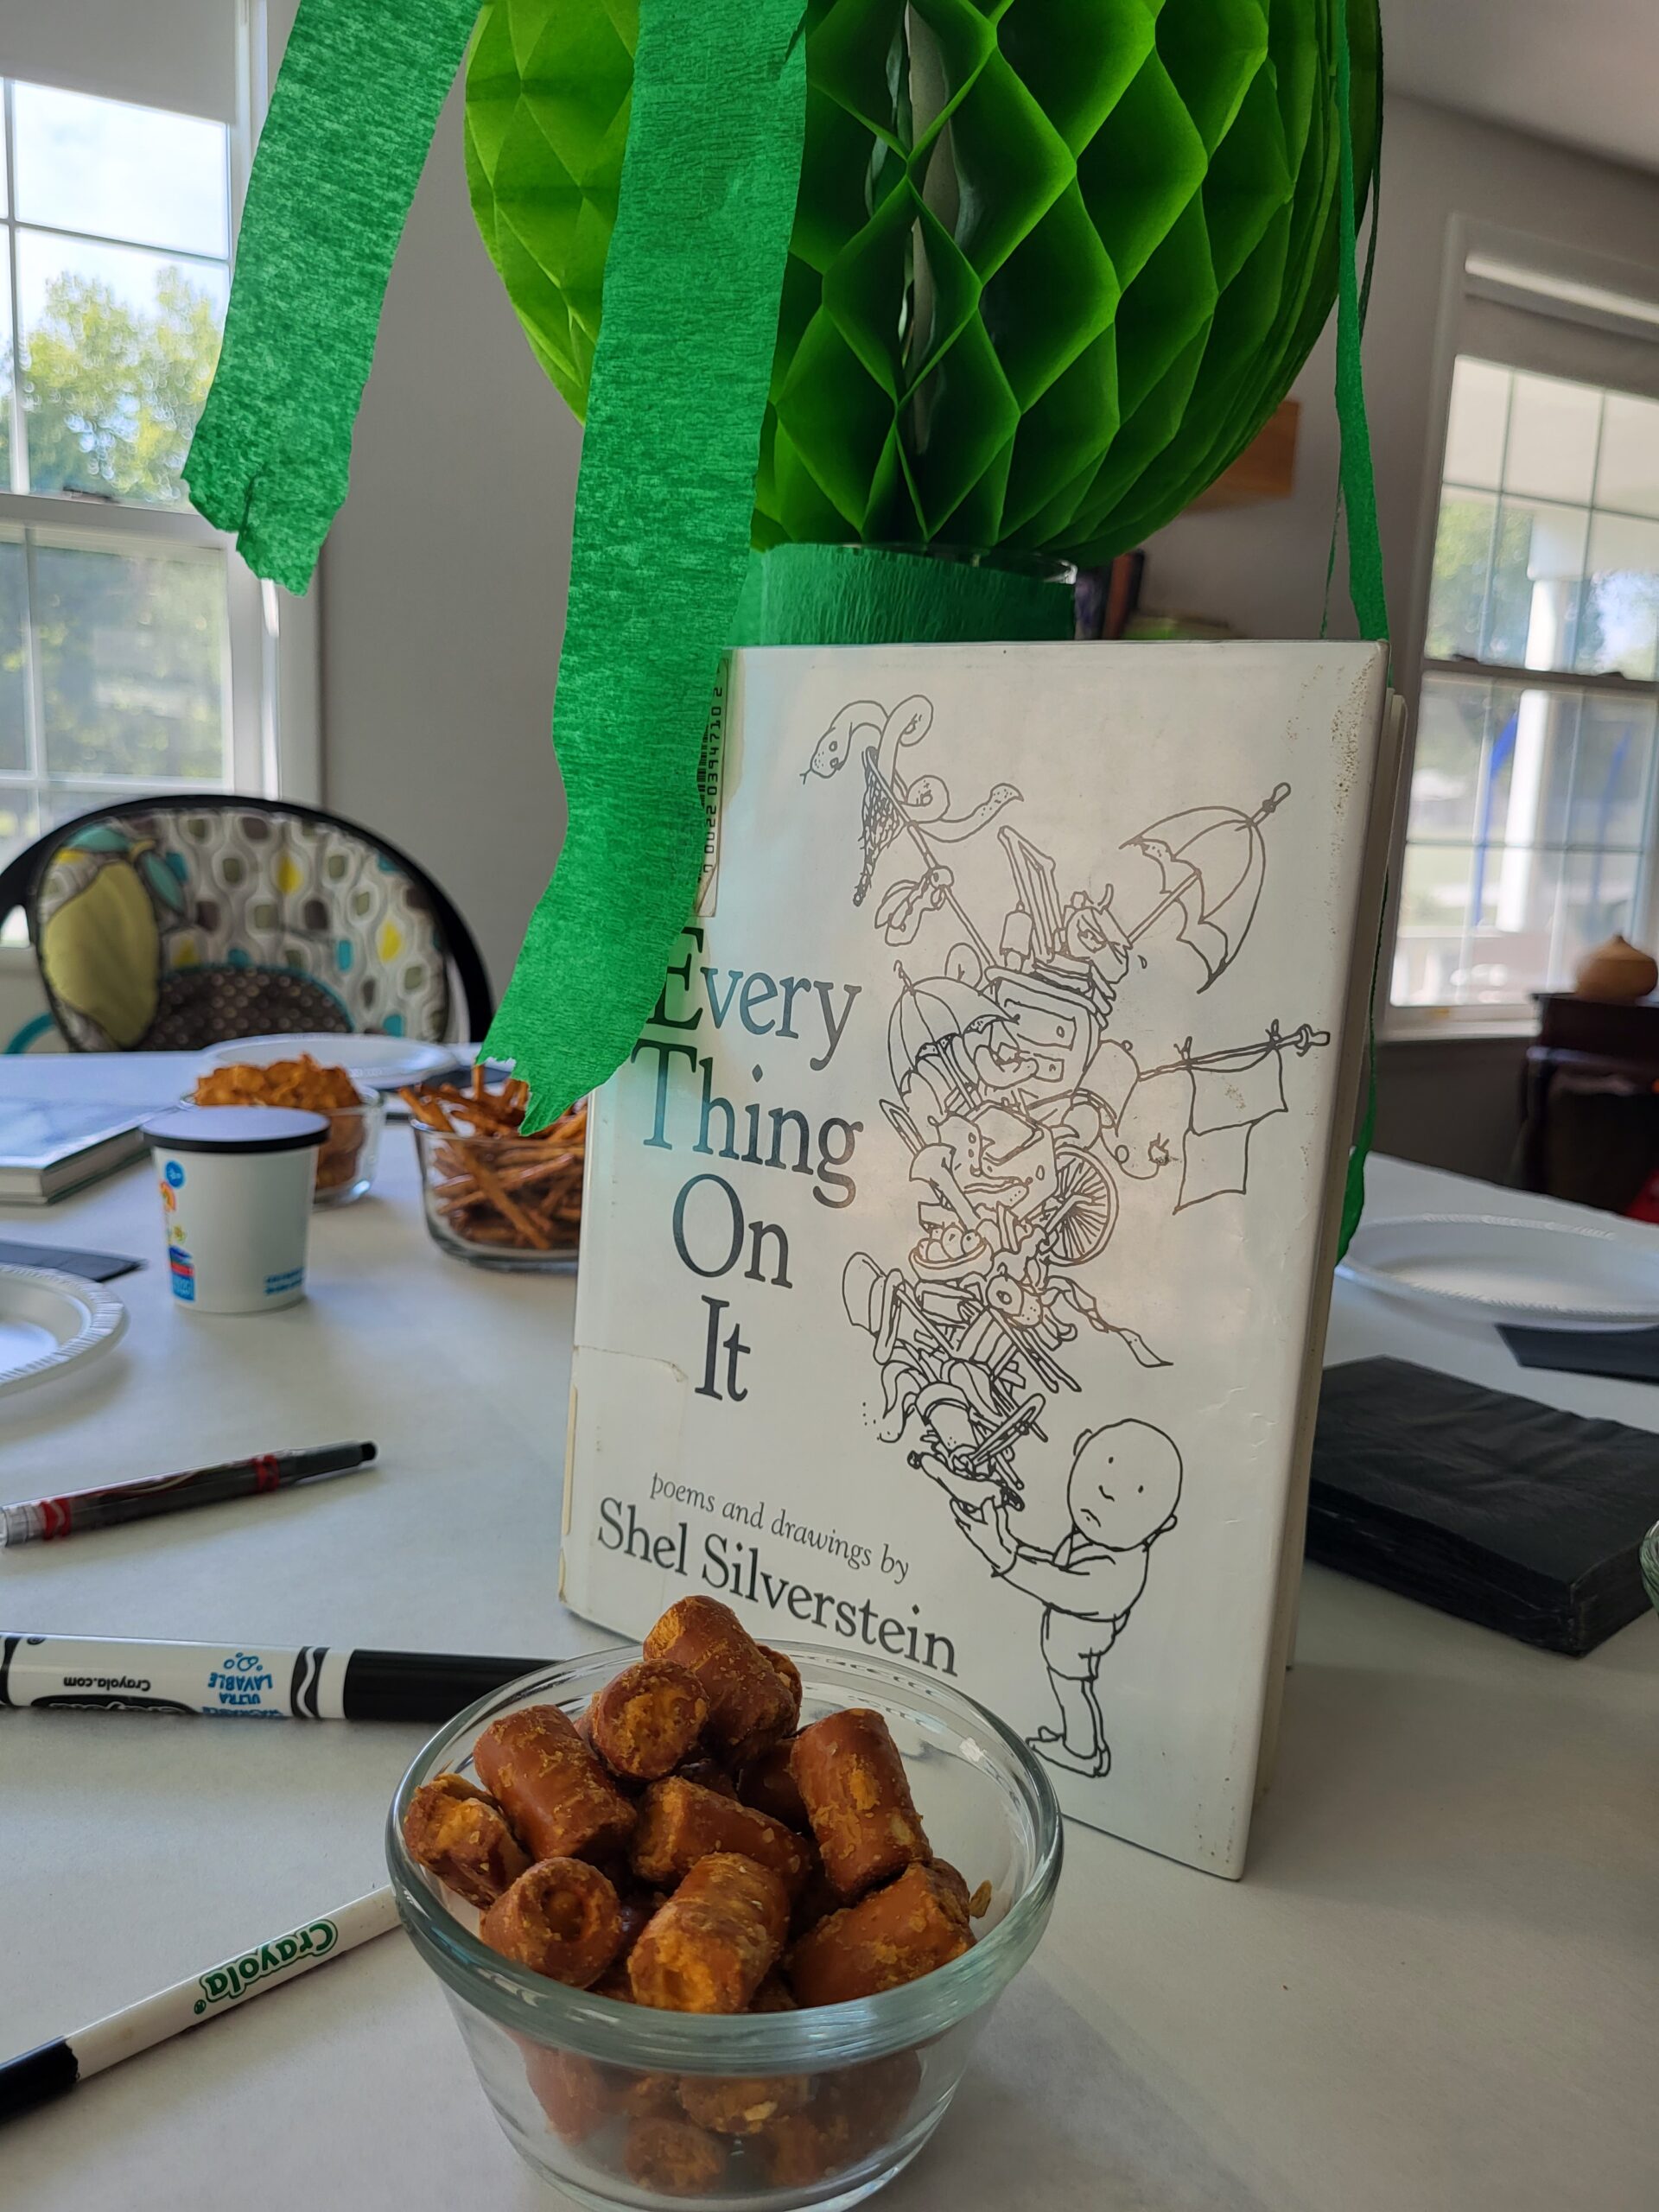 5 Steps for an Exciting Shel Silverstein Poetry Party